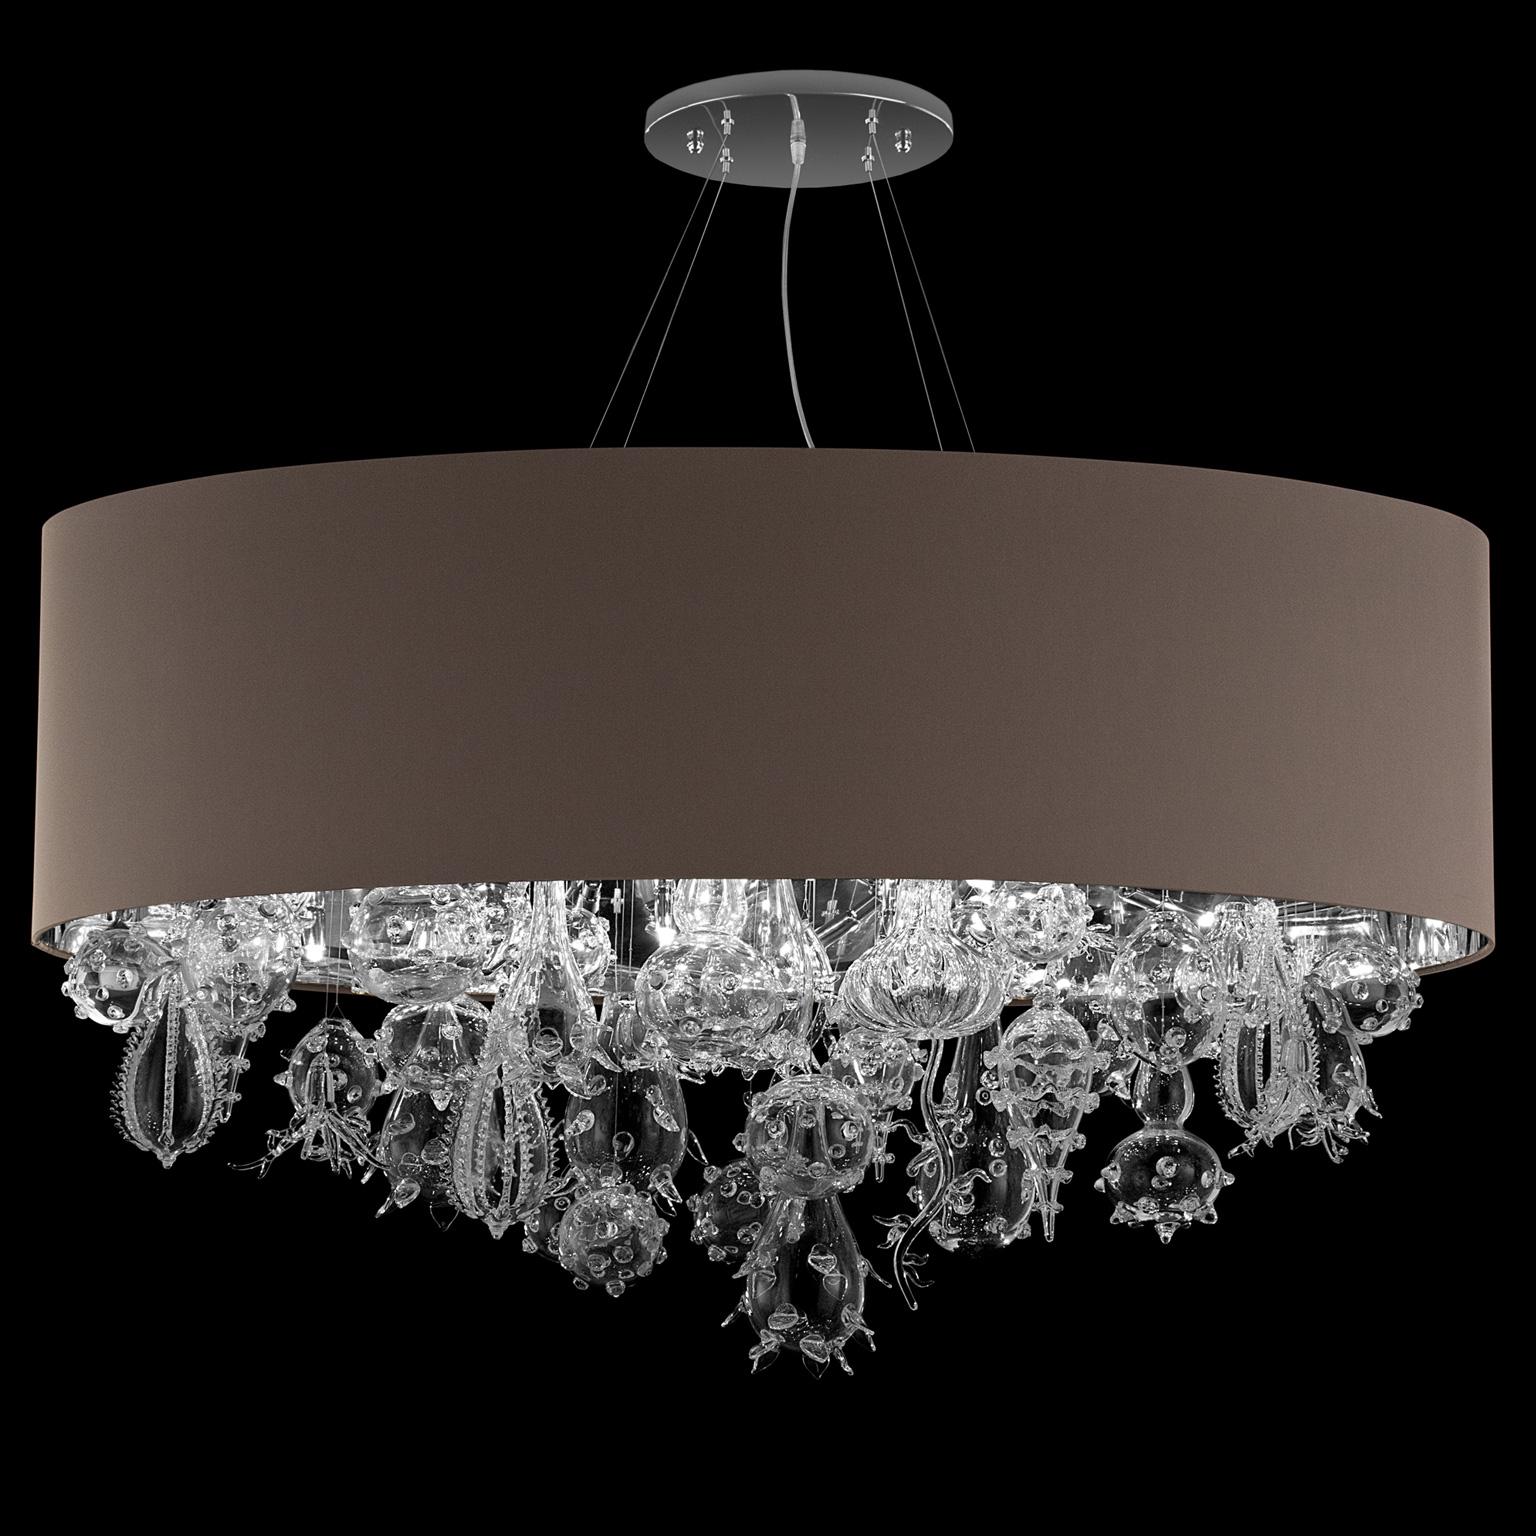 Absolute d'acqua suspension with cotton lampshade, artistic crystal glass sea mood by Multiforme
Absolute d'acqua suspension lamp with dove grey cotonette lampshade and gold leaf artistic glass elements by Multiforme. Polished gold frame. The